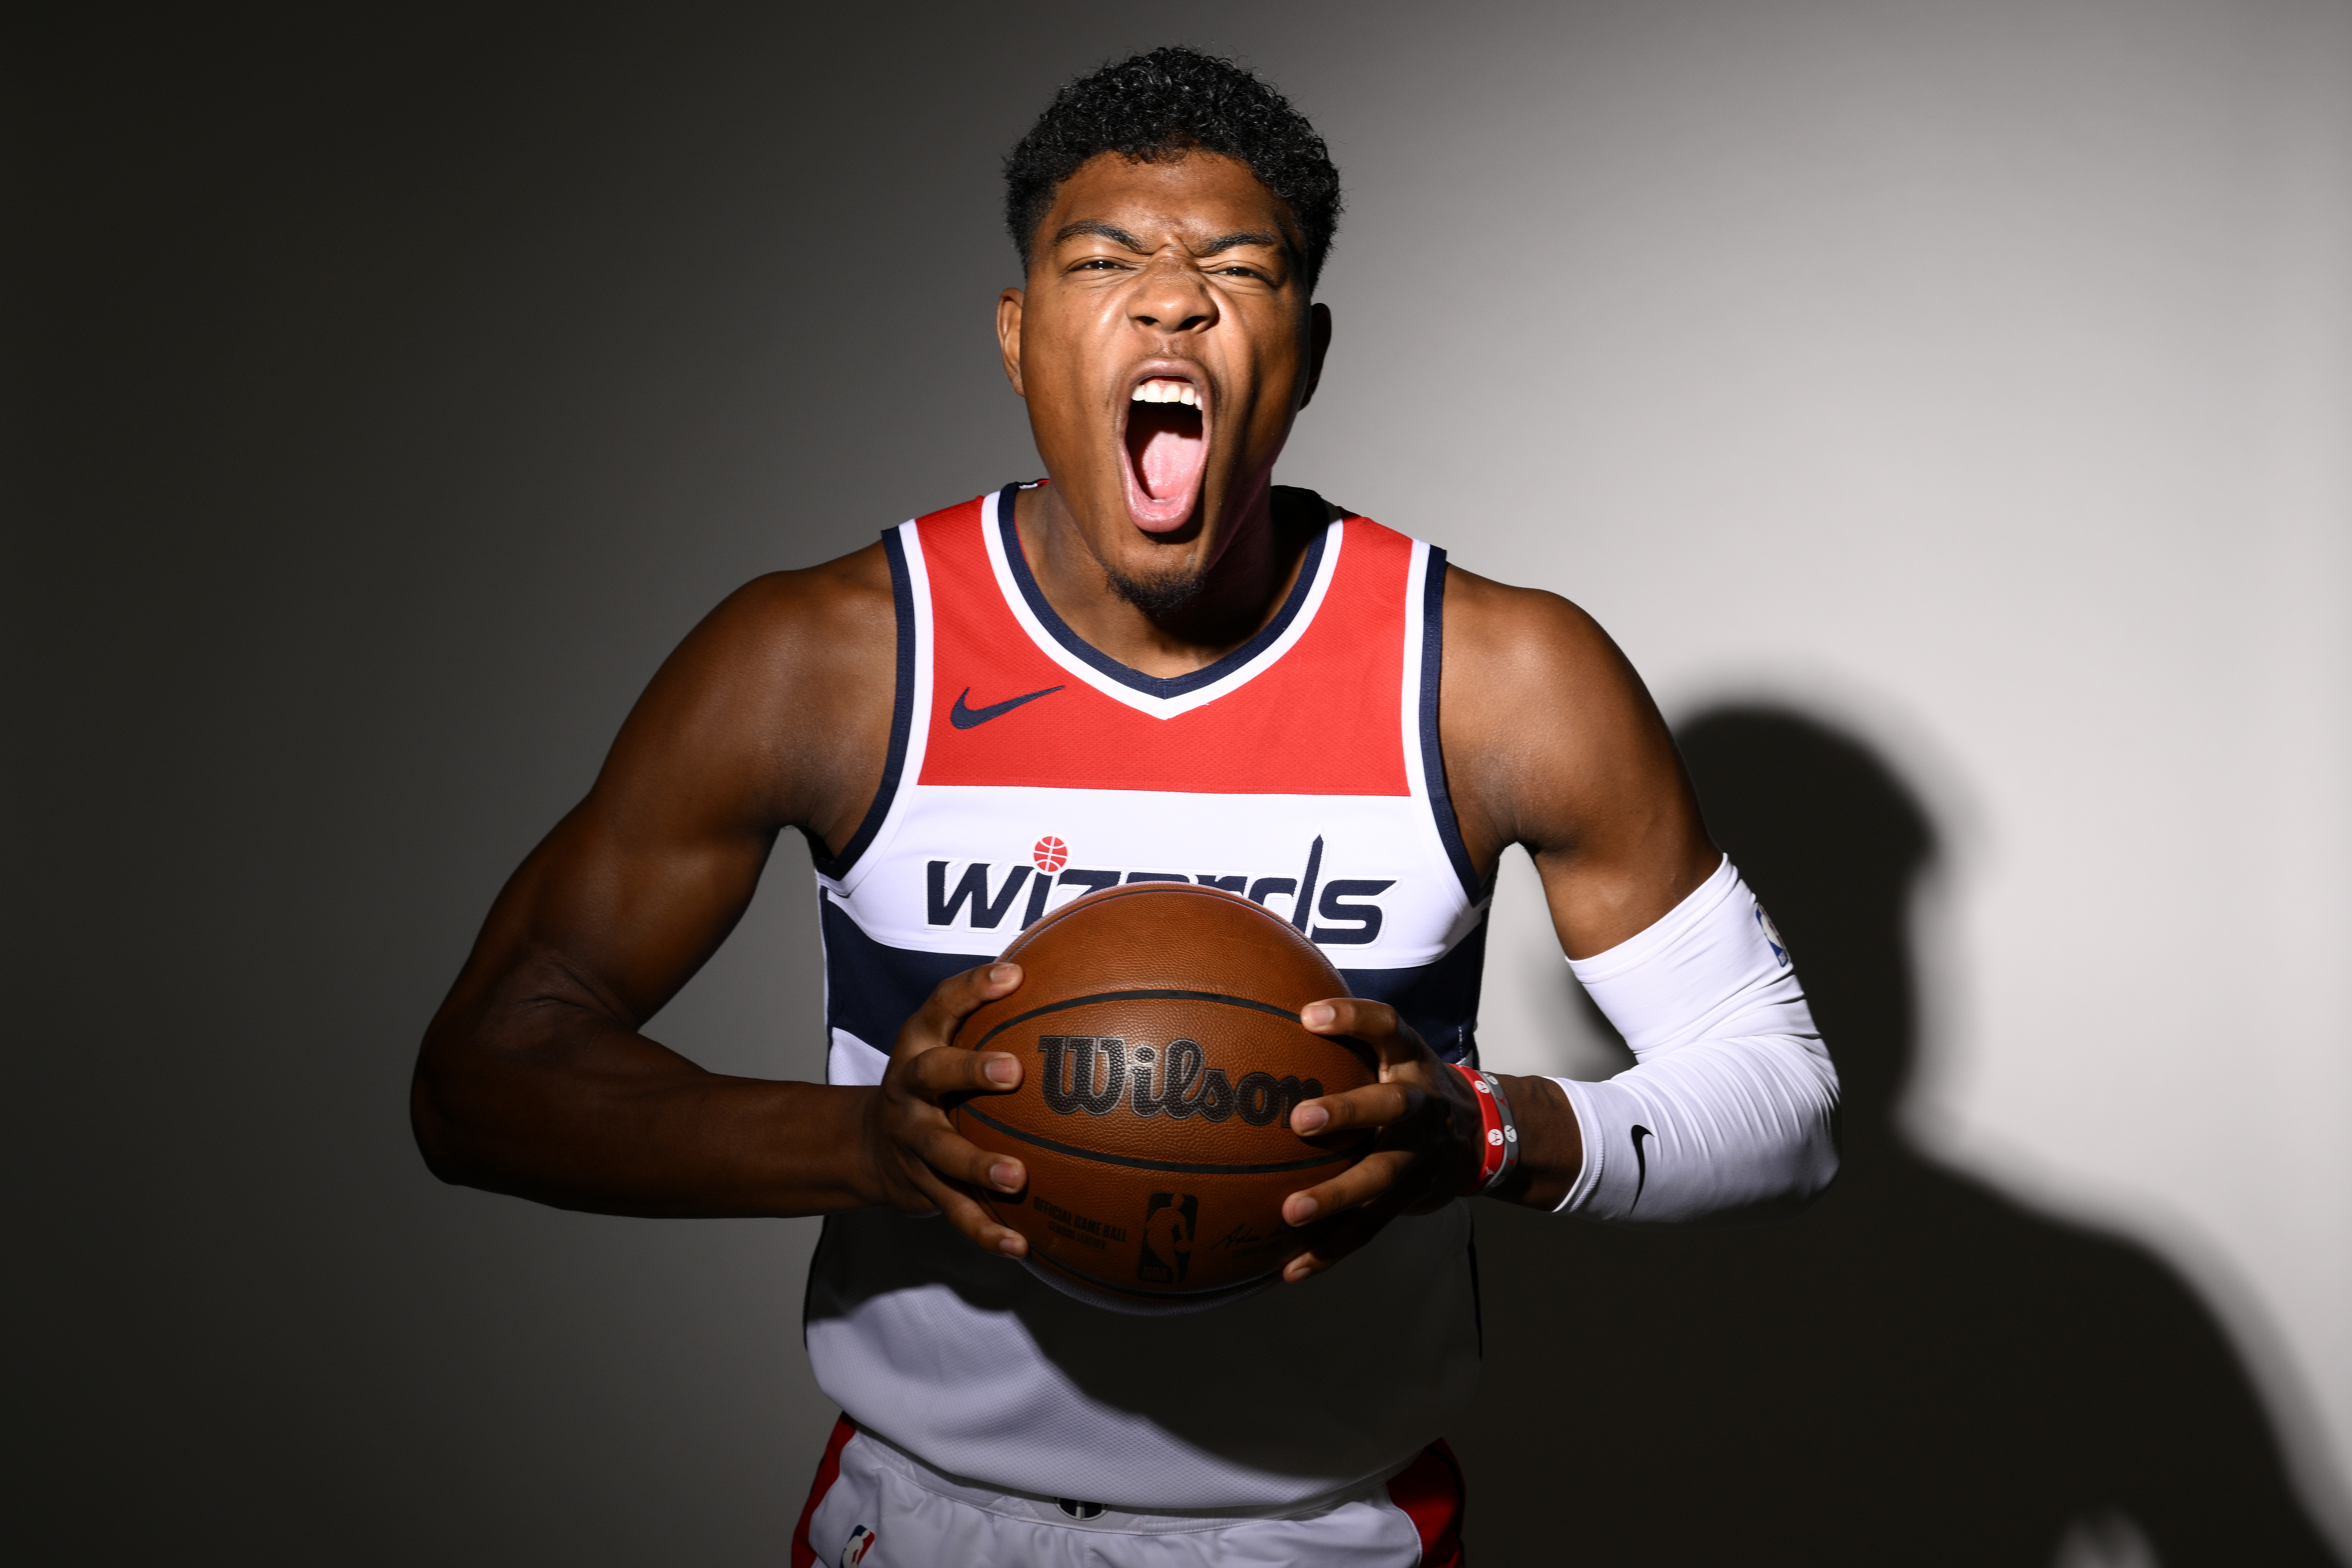 Washington Wizards New Uniforms – Outside the Beltway